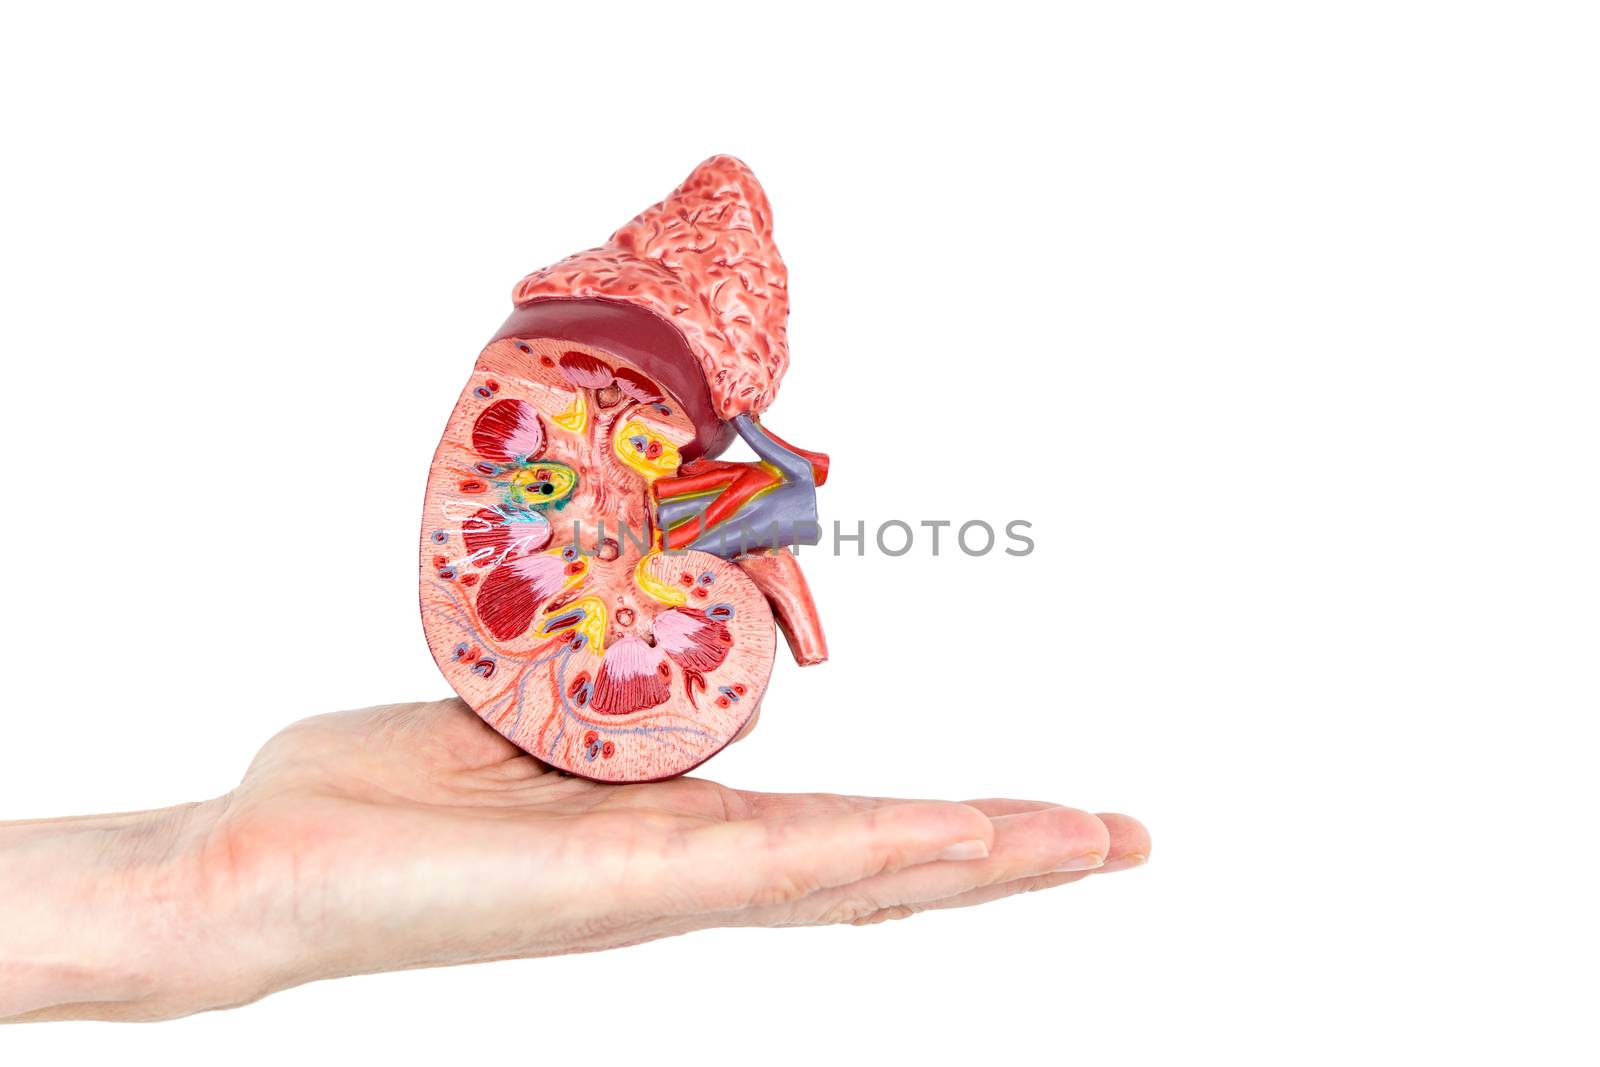 Flat hand showing model with inside of human kidney by BenSchonewille